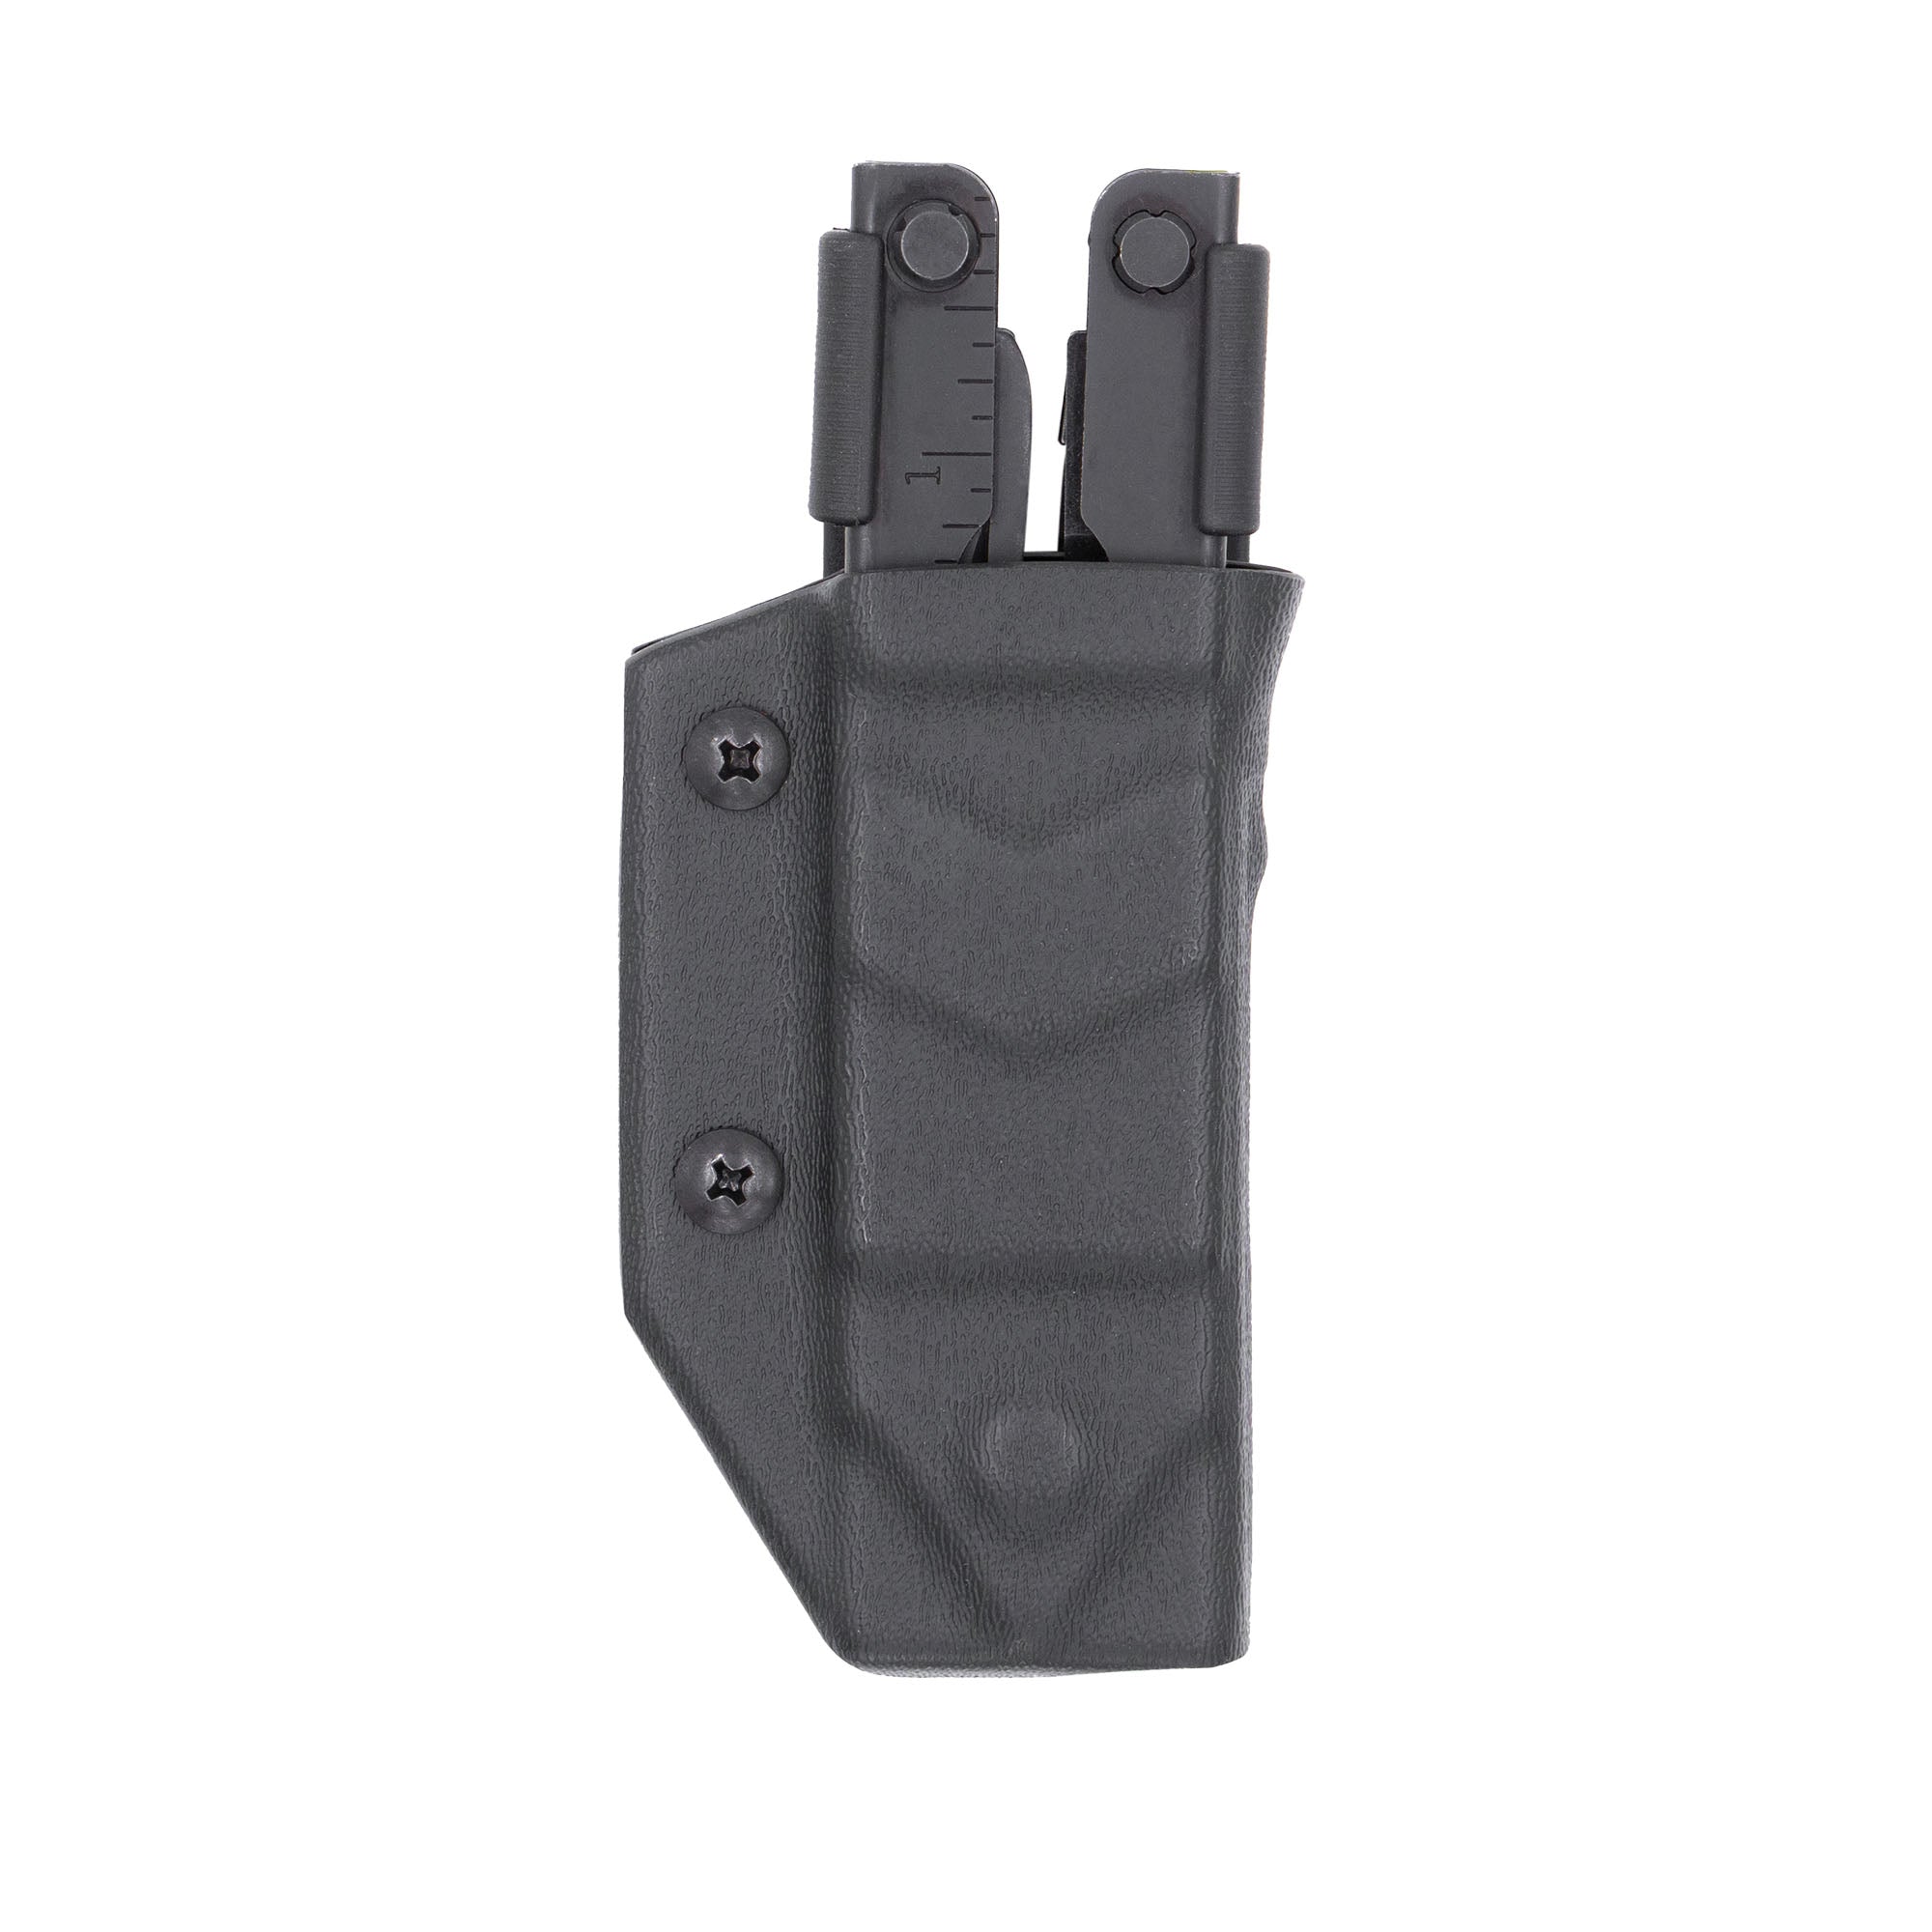 Kydex Sheath for the Gerber MP600 | Free Shipping In all US